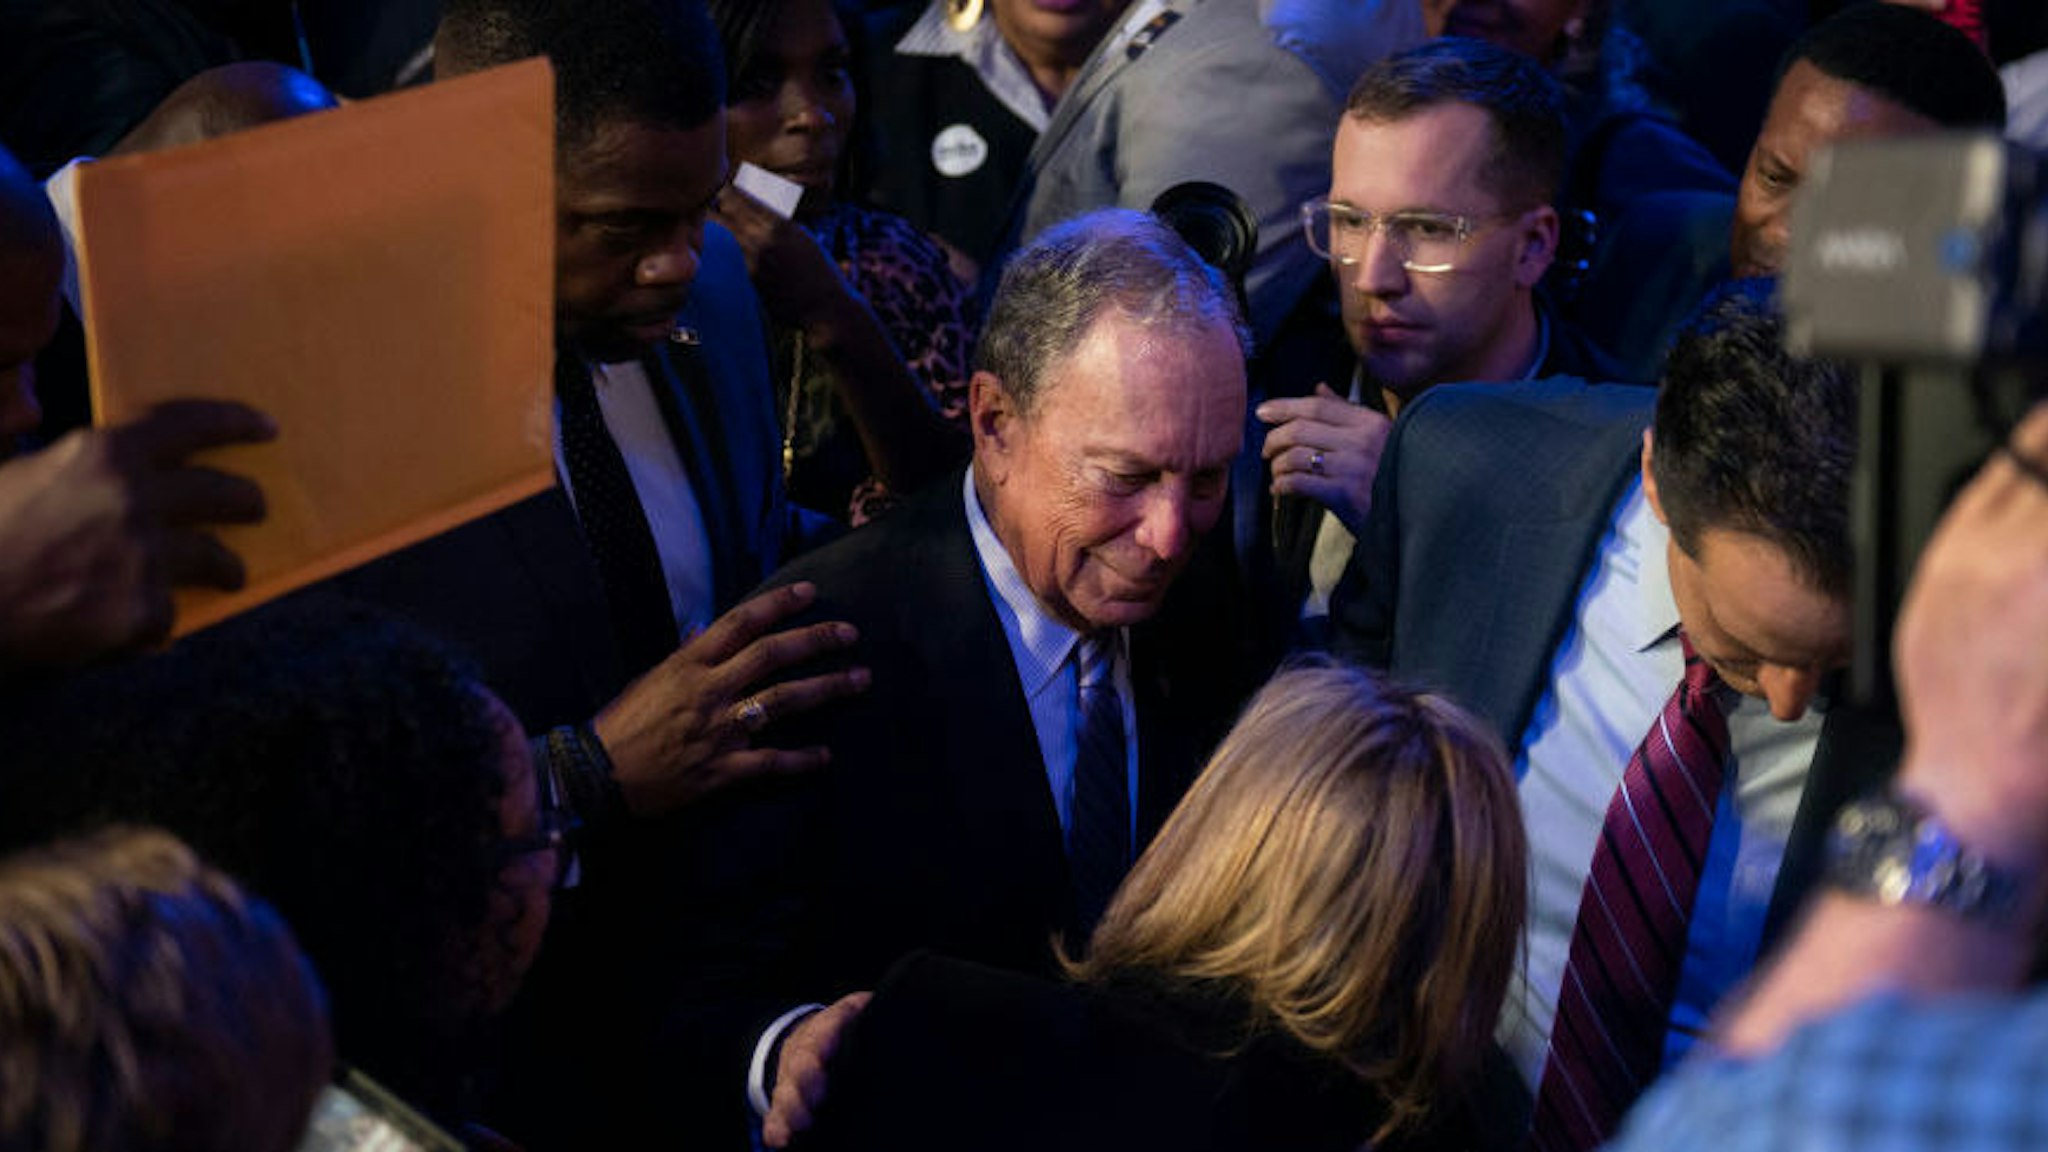 Democratic presidential candidate Mike Bloomberg greets well-wishers after speaking at the Buffalo Soldiers National Museum on February 13, 2020 in Houston, Texas. The former New York City mayor launched "Mike for Black America," an effort to focus on key issues relating to black Americans on his fifth campaign trip to Texas. (Photo by Callaghan O'Hare/Getty Images)